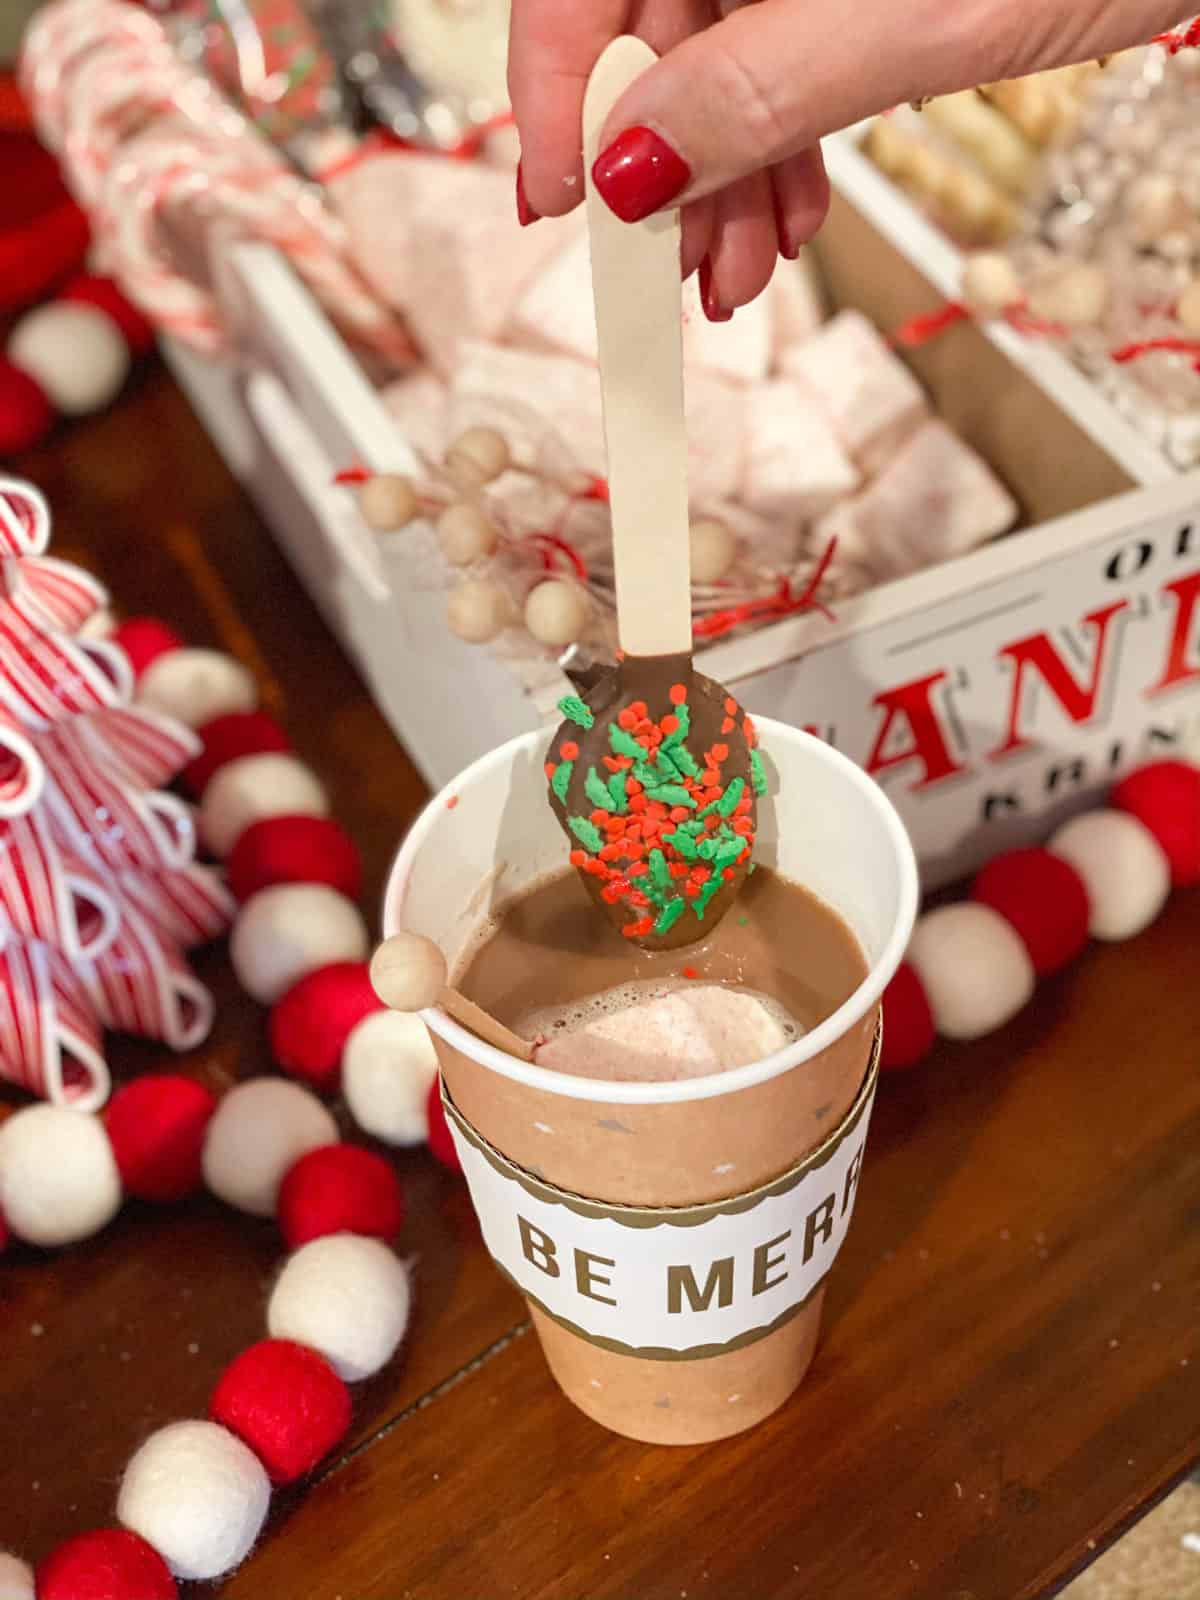 Dipping chocolate into hot cocoa